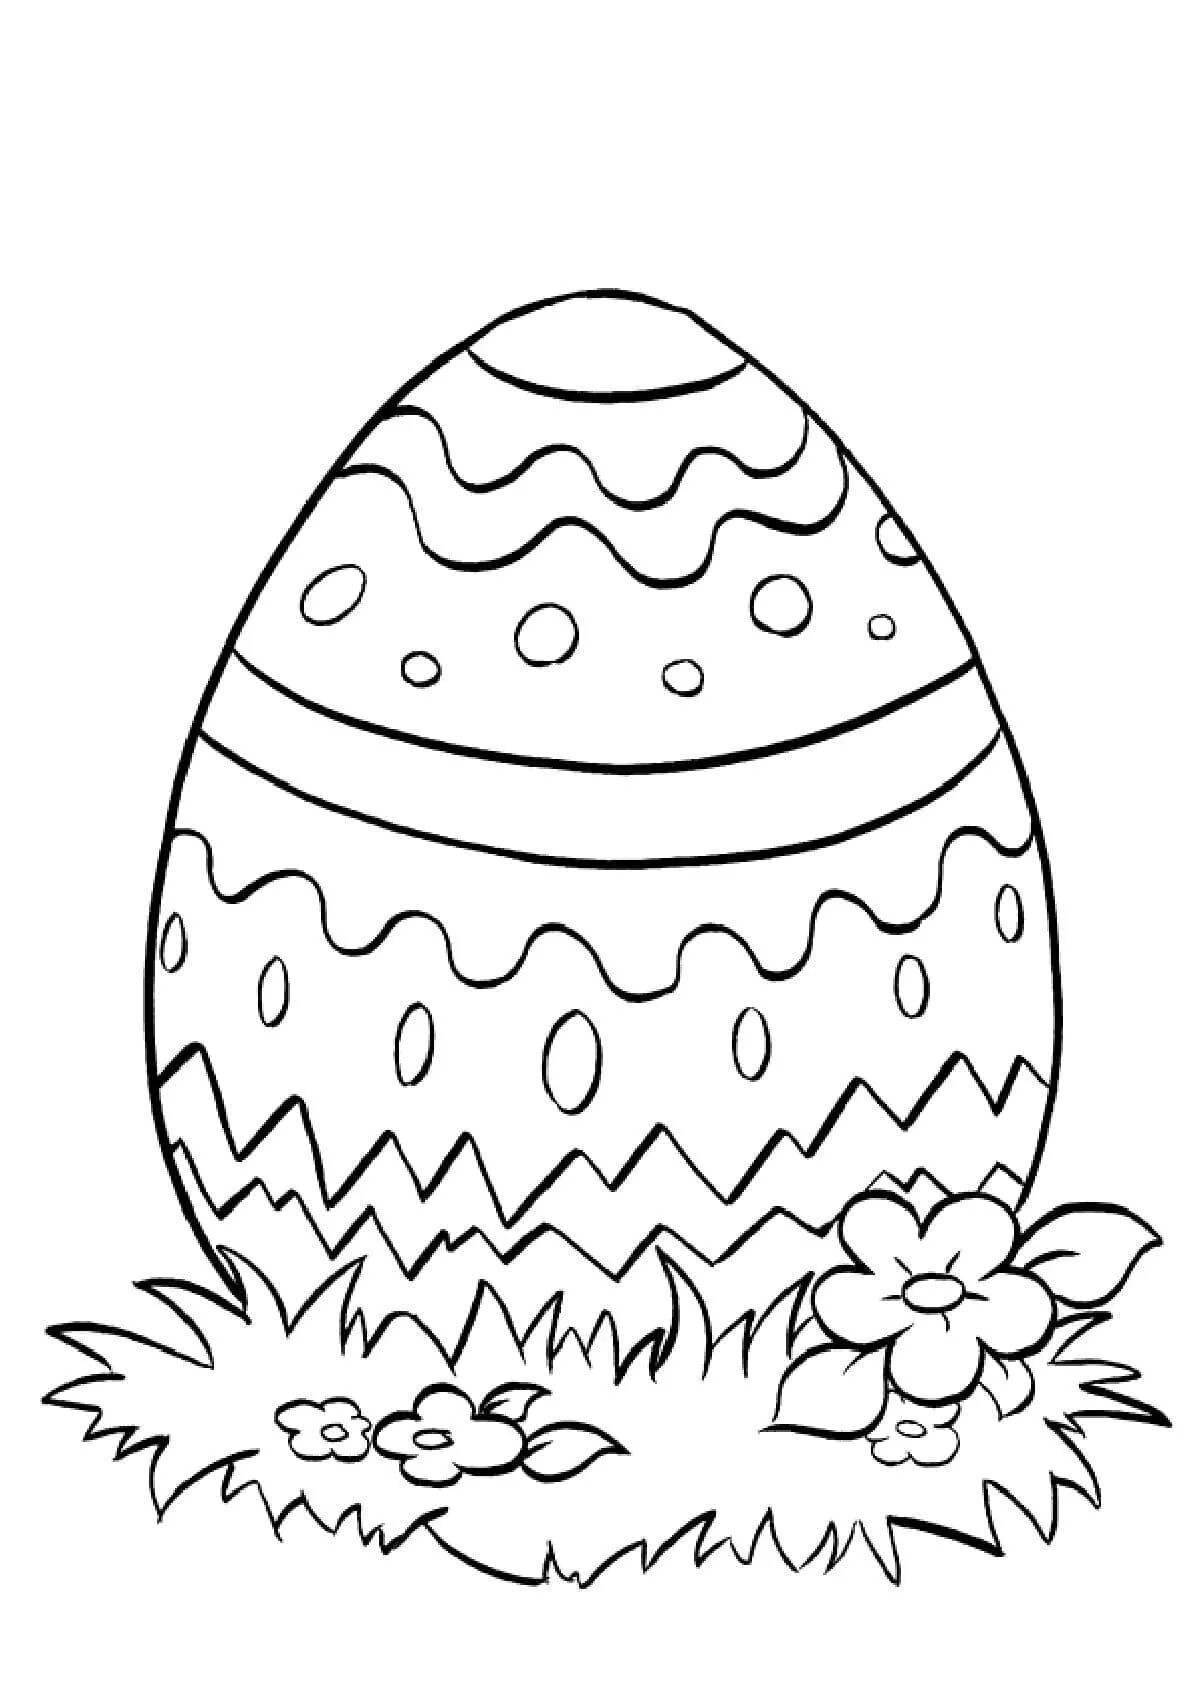 Attractive coloring pages with easter symbols